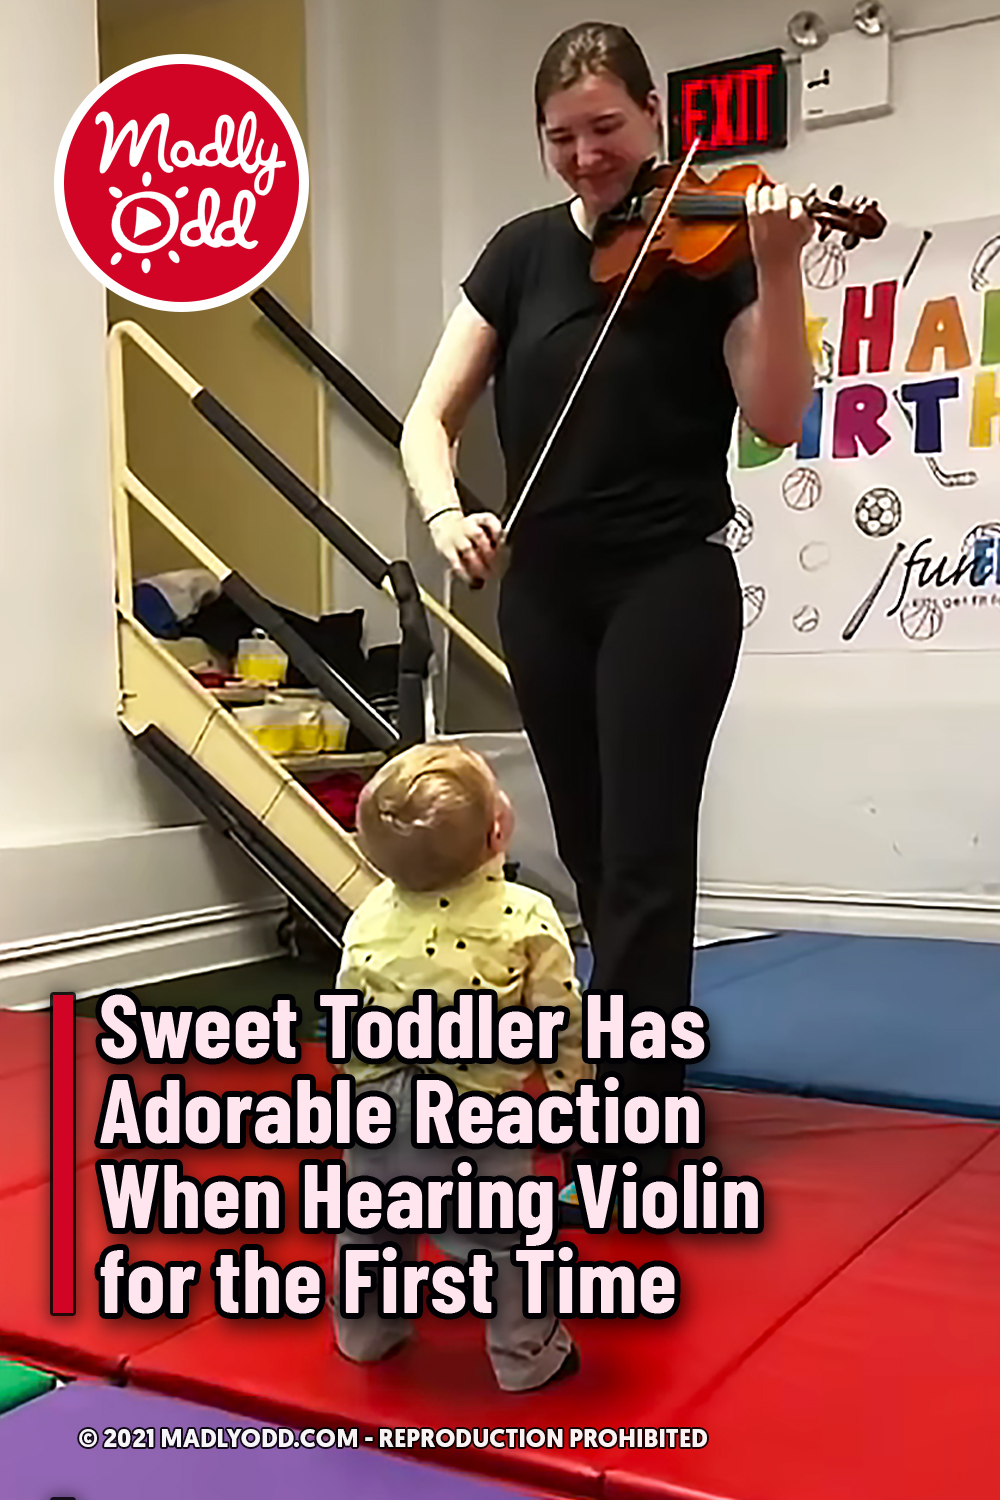 Sweet Toddler Has Adorable Reaction When Hearing Violin for the First Time